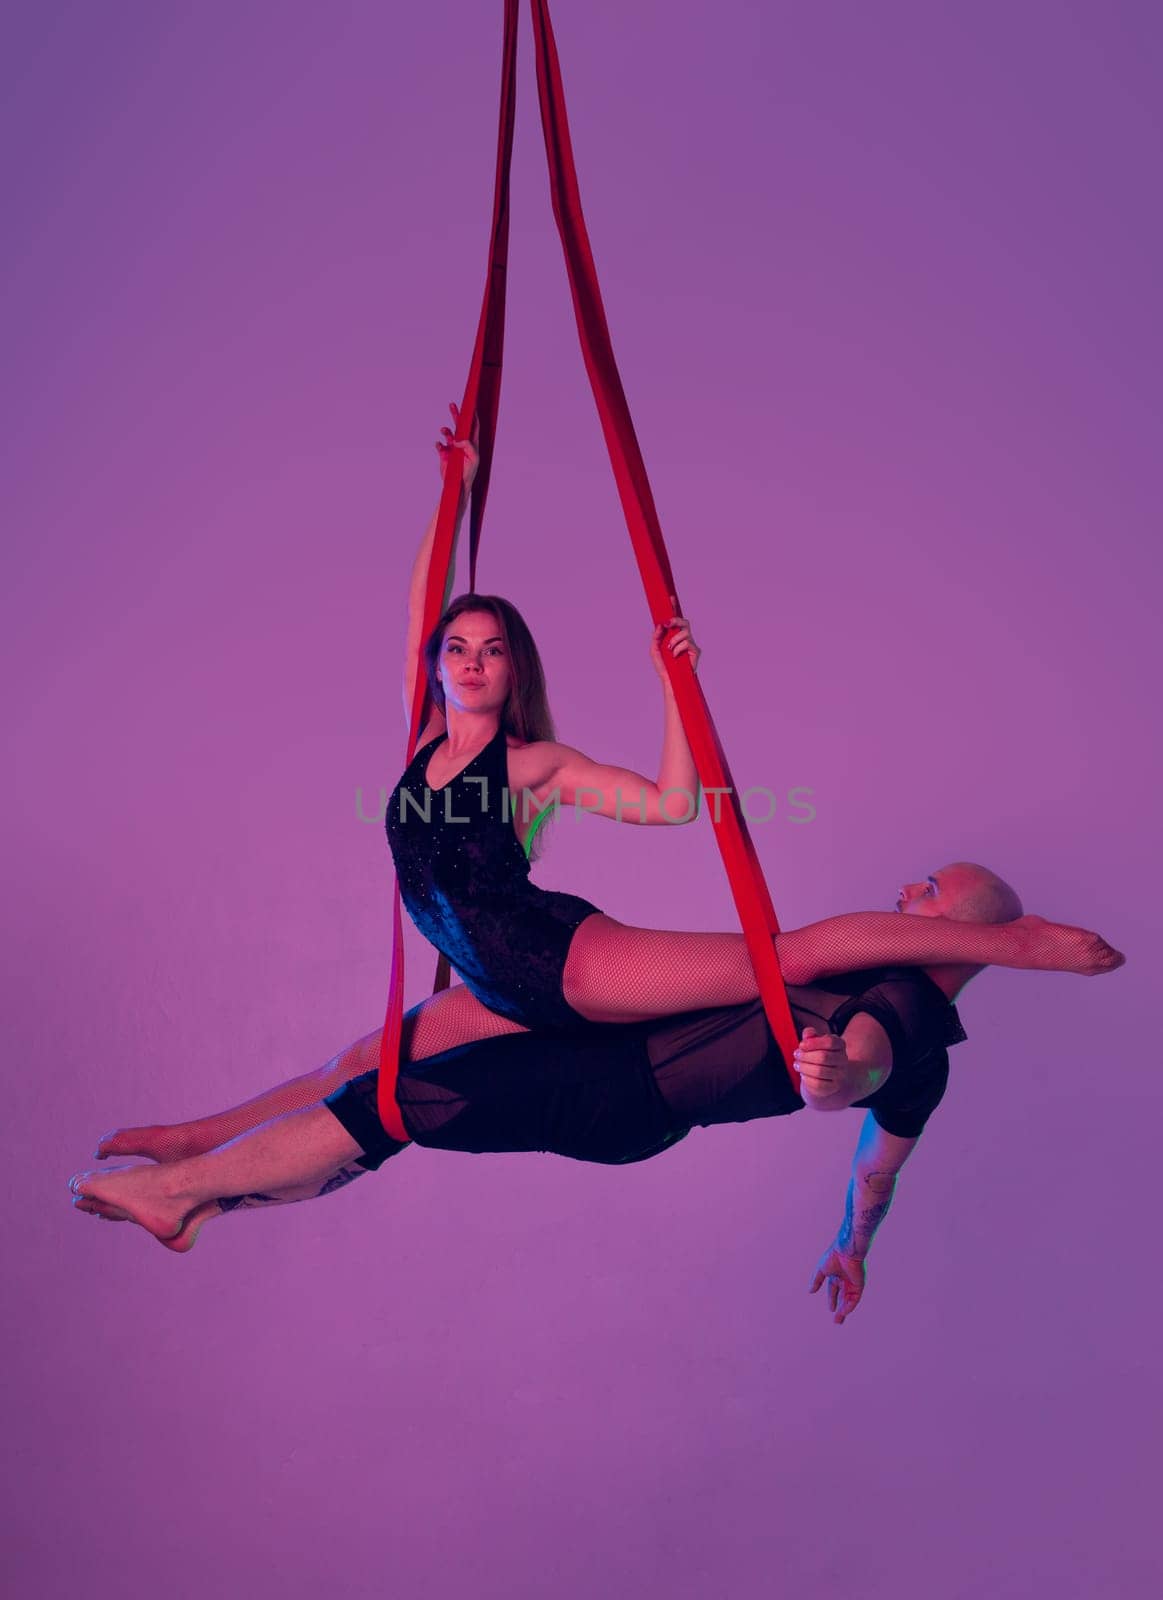 Gymnasts performance on a red canvases. Charming woman and handsome man in a dark sport suits are doing acrobatic elements showing a twine in a studio against a colorful background. Dancing in the air with balance.